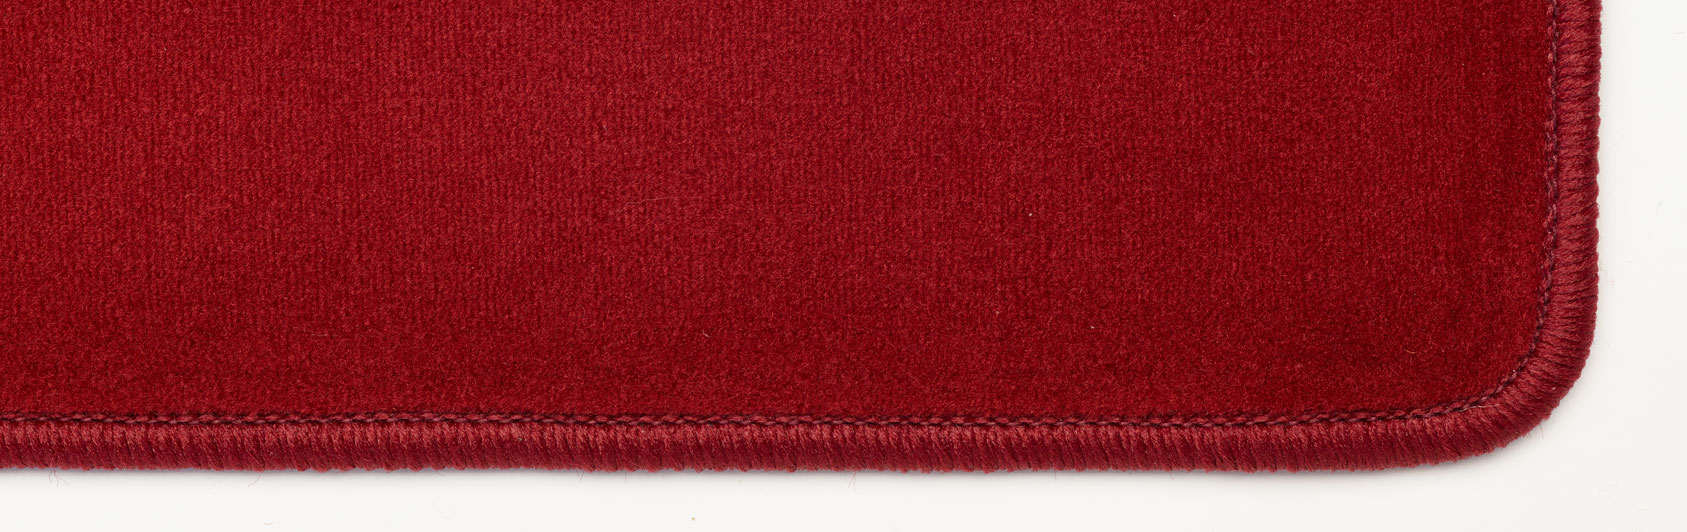 Kirchenteppich Velours Farbcode 611 Farbe hellrot